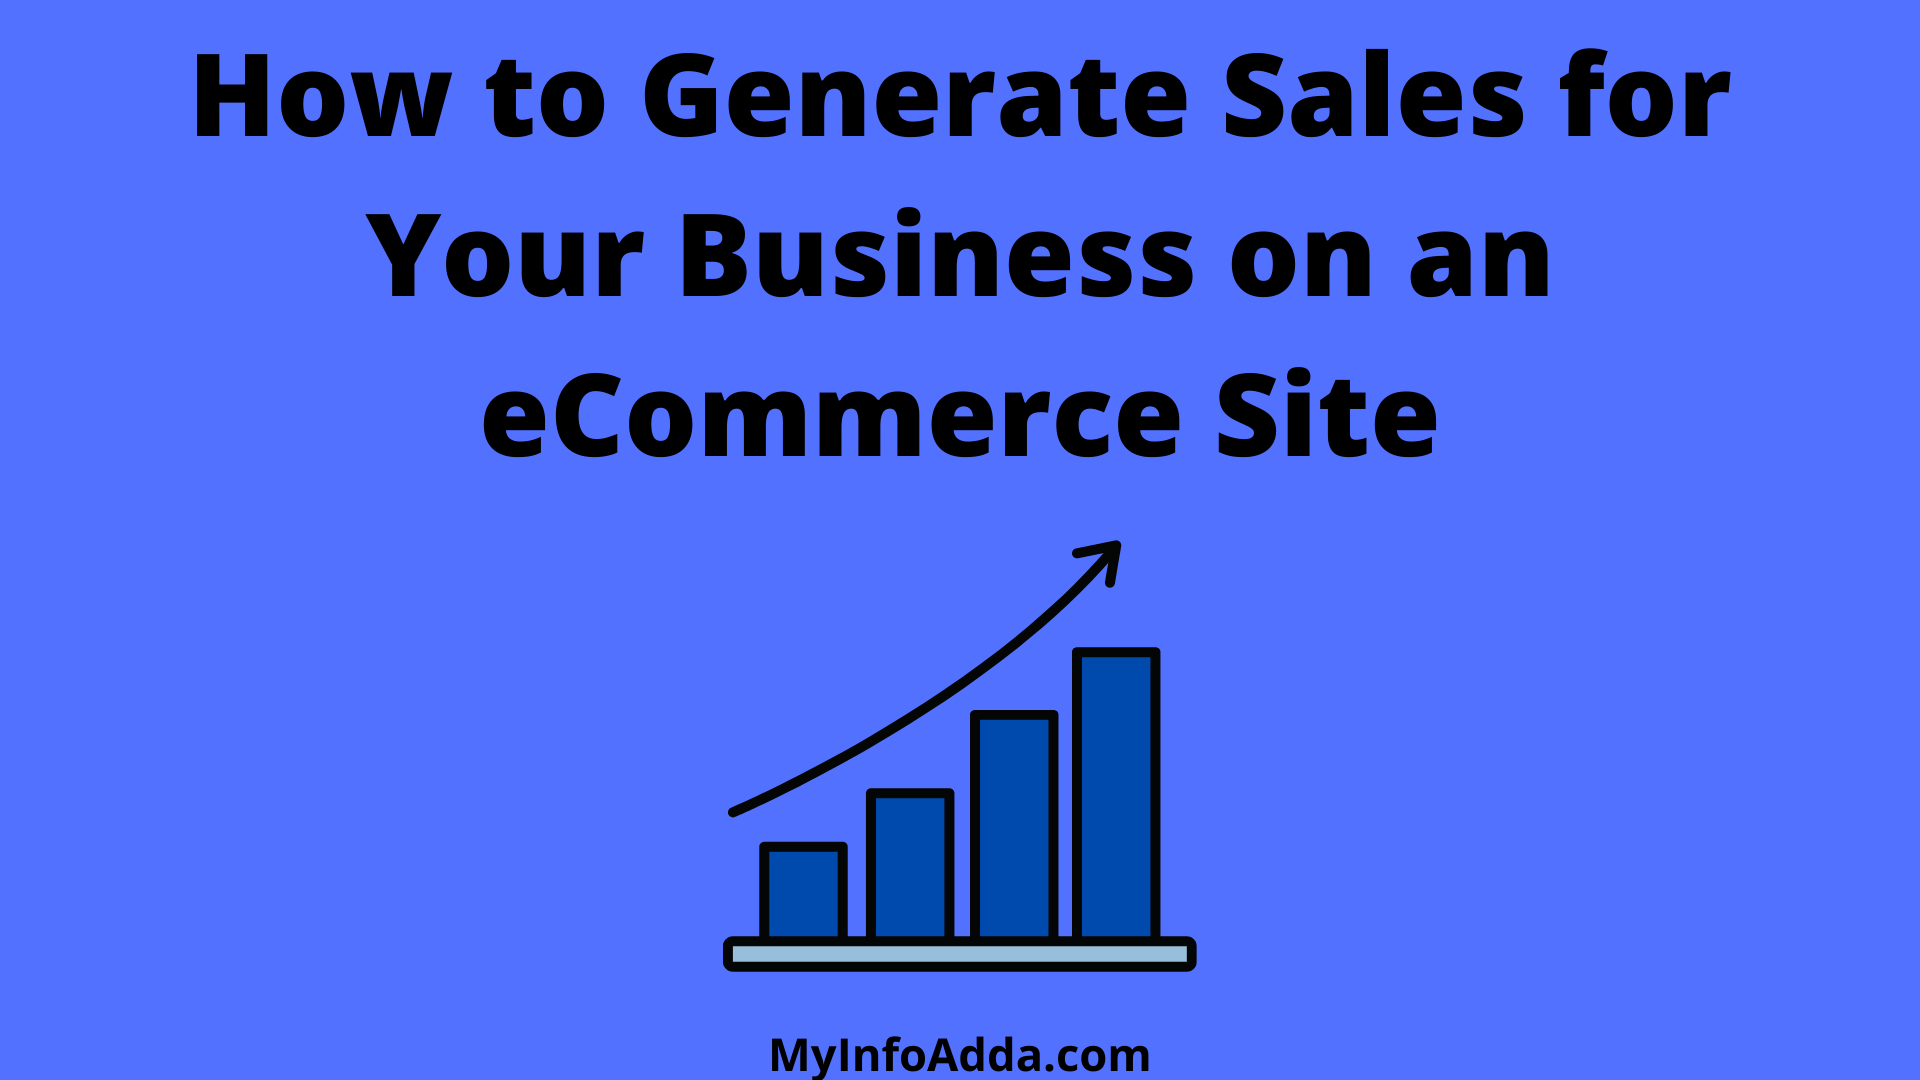 How to Generate Sales for Your Business on an eCommerce Site